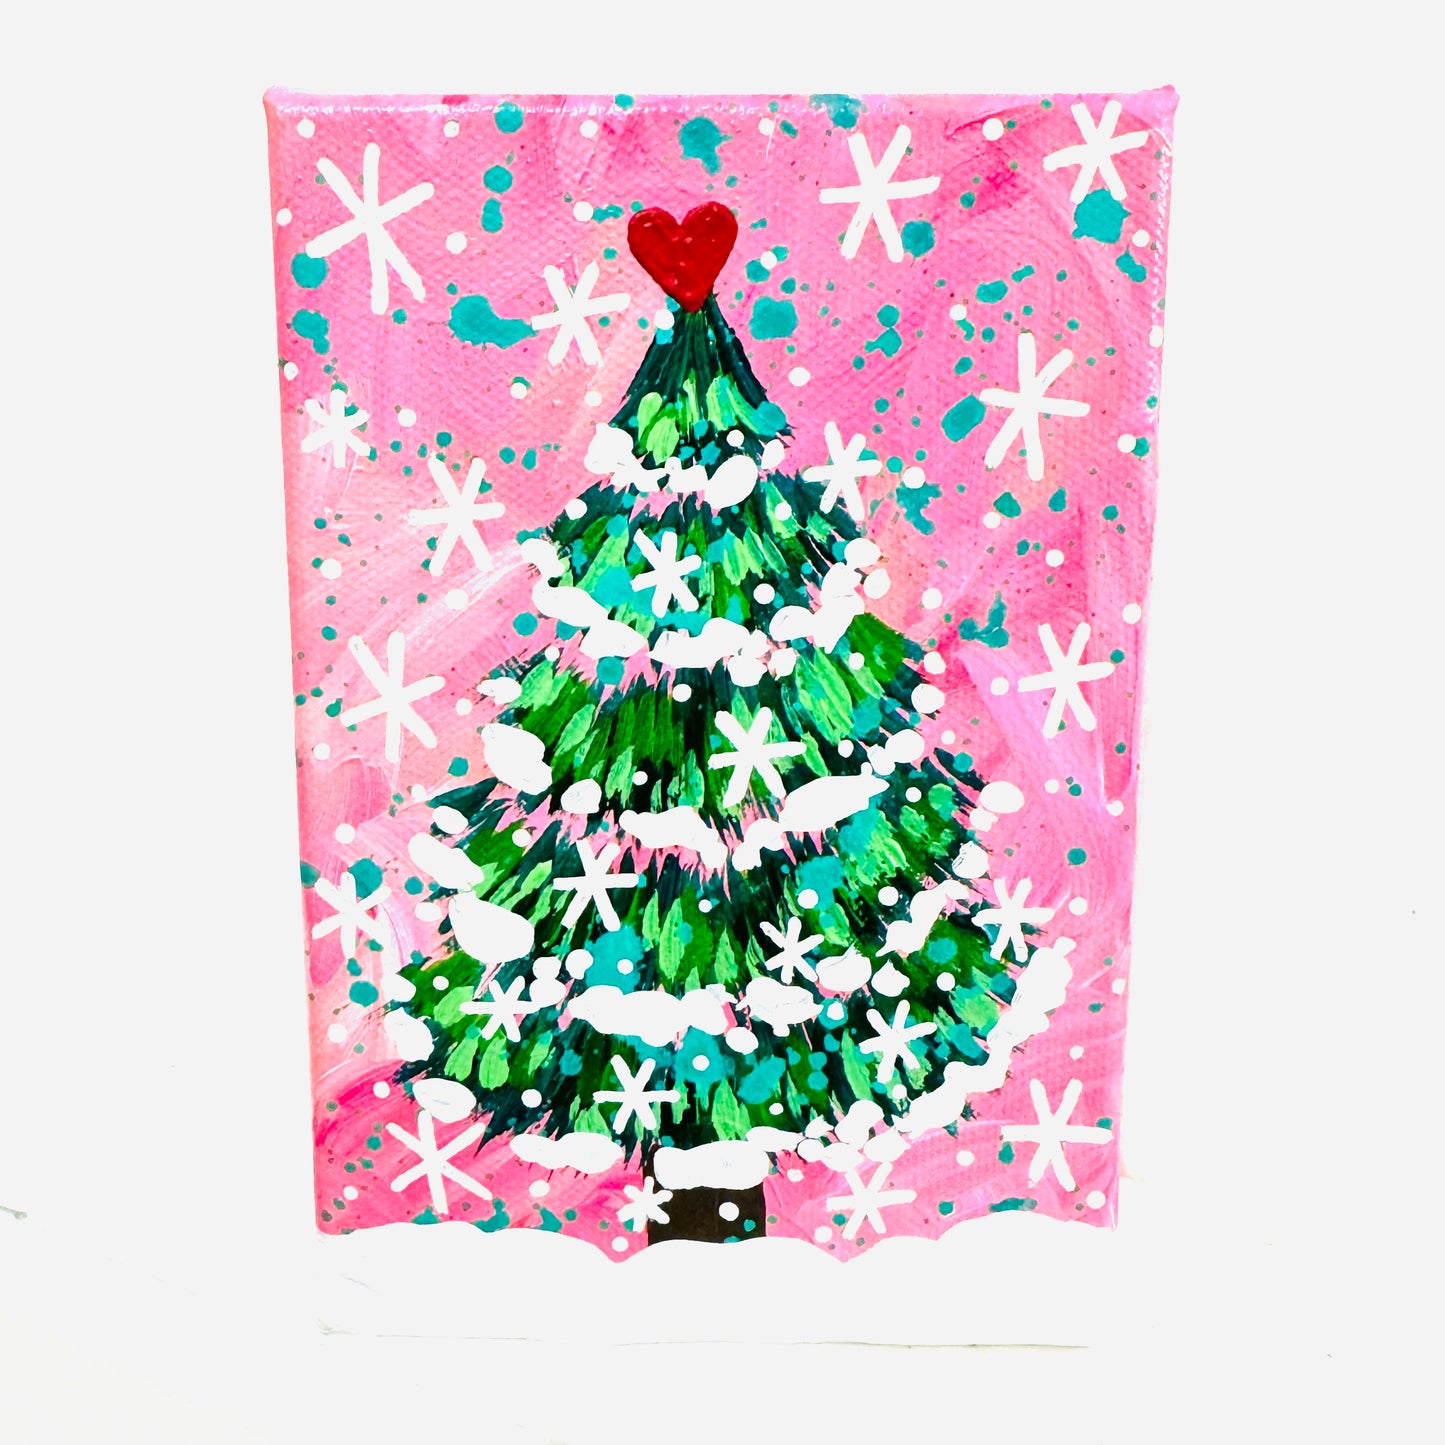 PRE-ORDER / Pink Christmas Tree 5x7 inch original painting on canvas